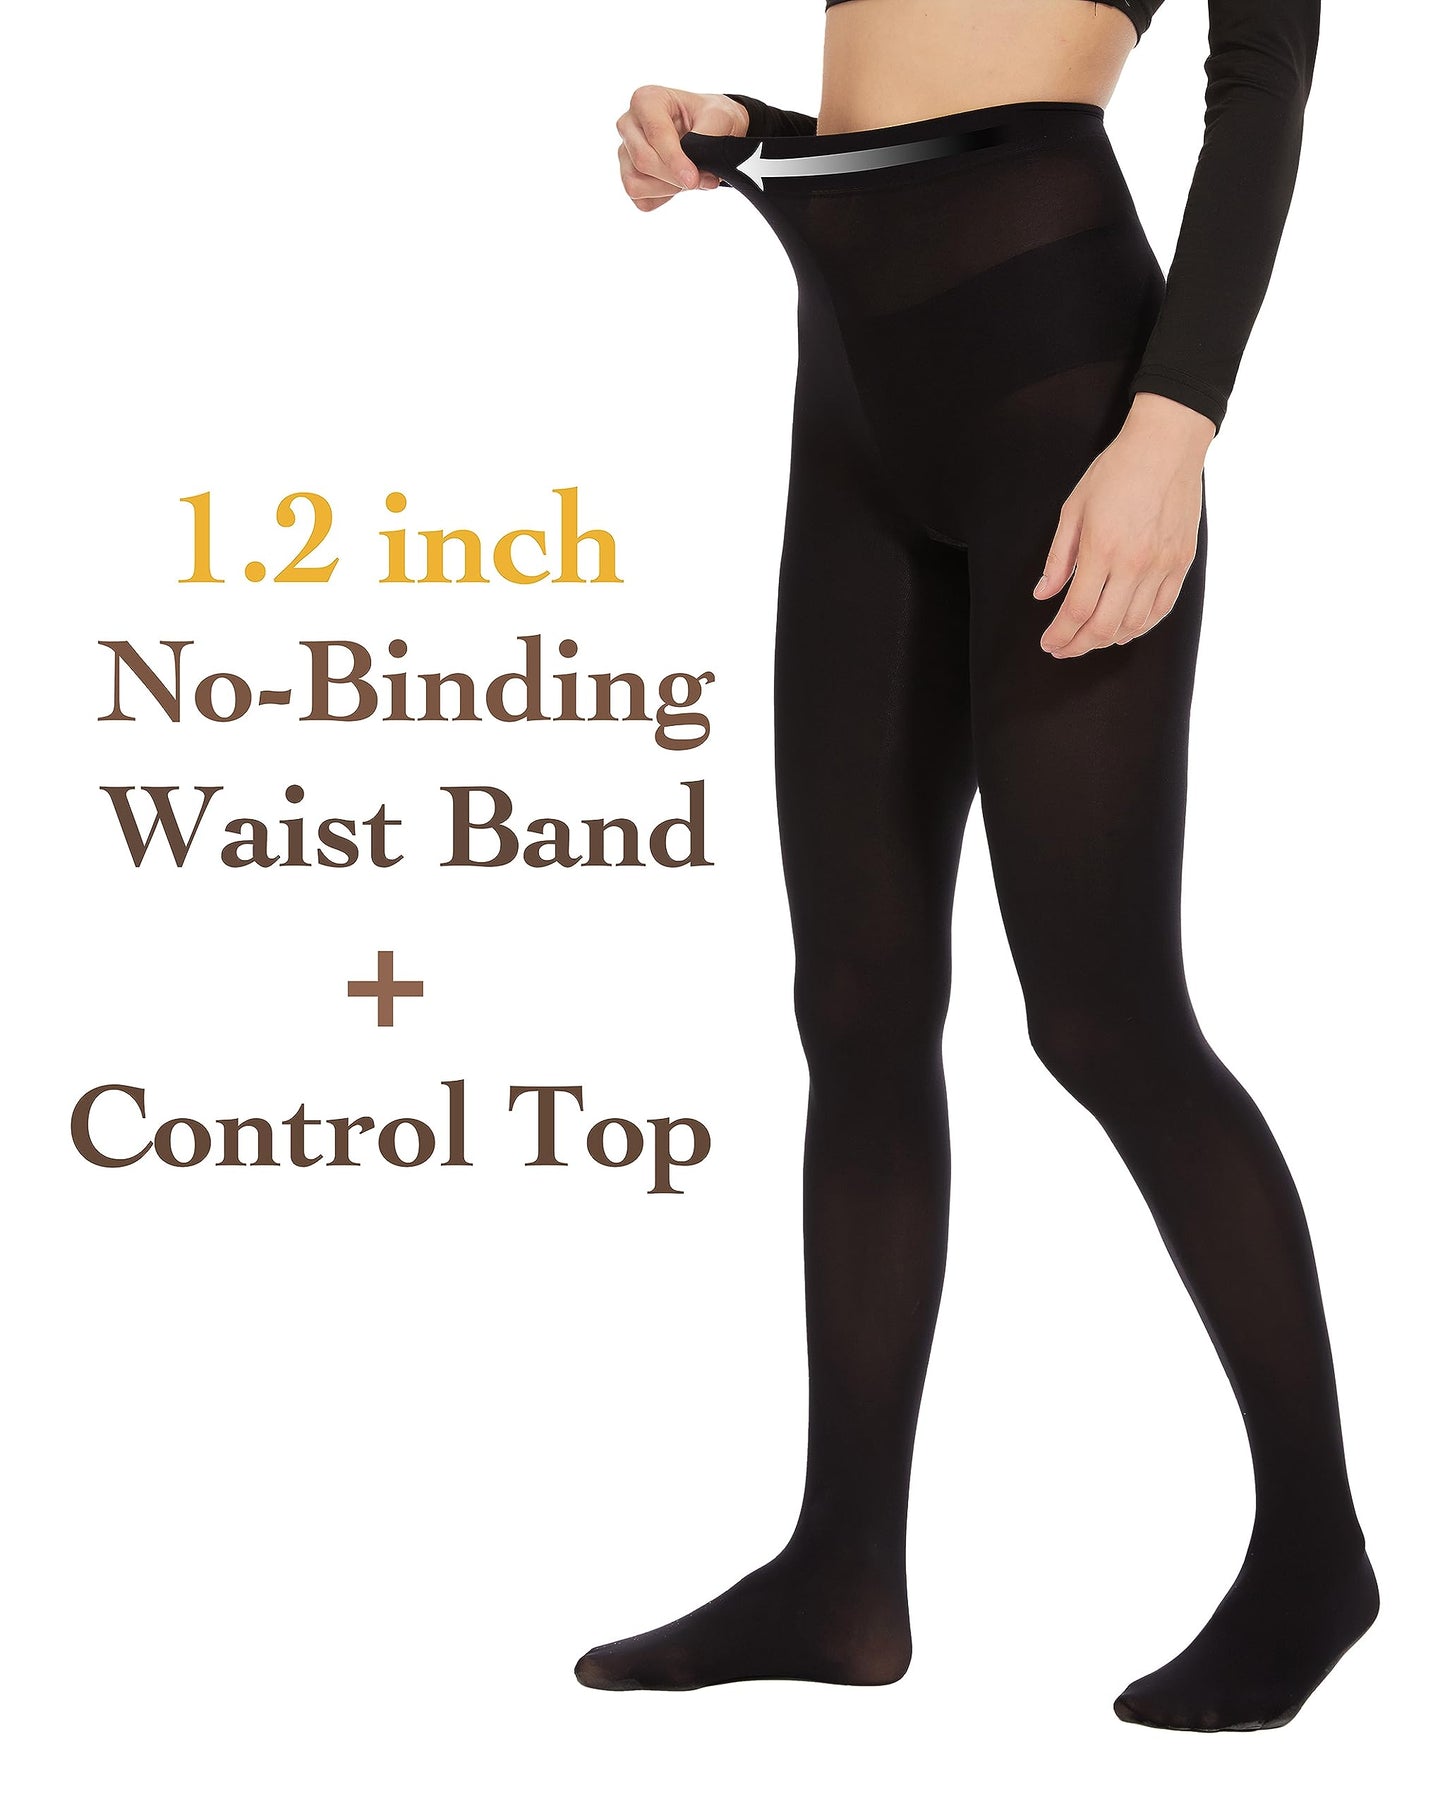 3 Pairs Black Tights for Women, Plus Size 60D Semi Opaque Tights, Control Top Microfiber Pantyhose for women